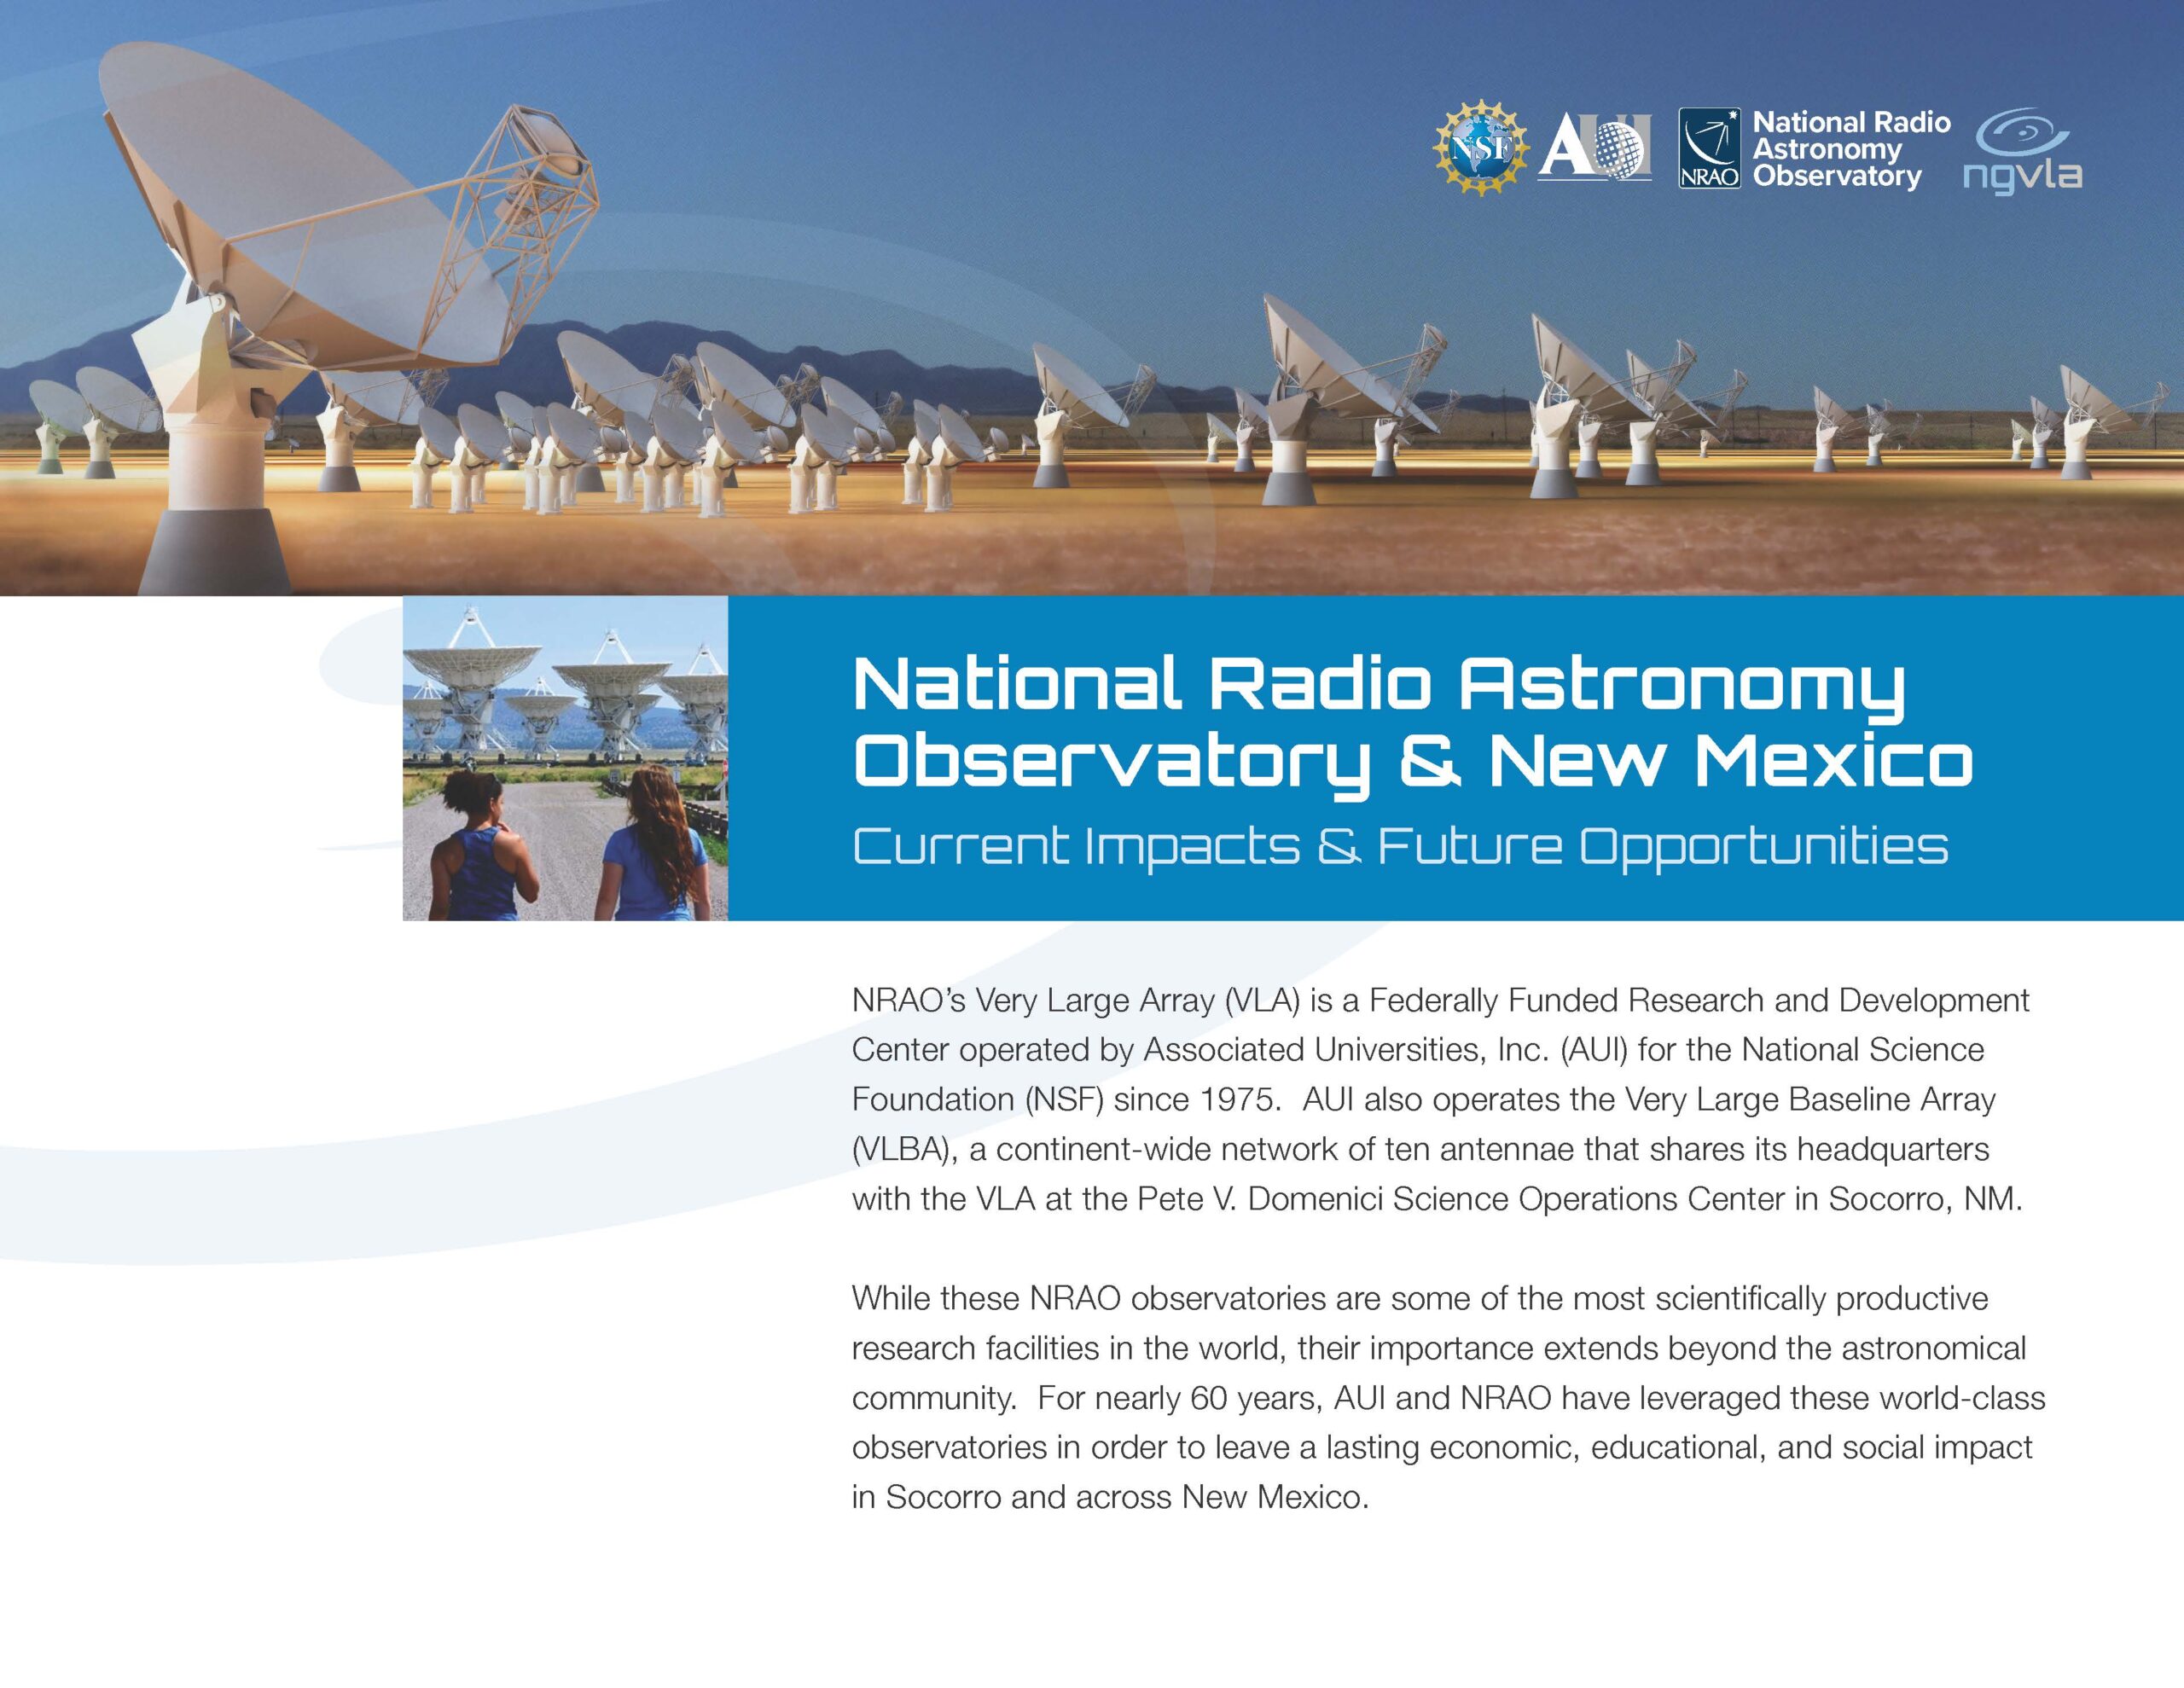 National Radio Astronomy Observatory & New Mexico Current Impacts & Future Opportunities Flyer